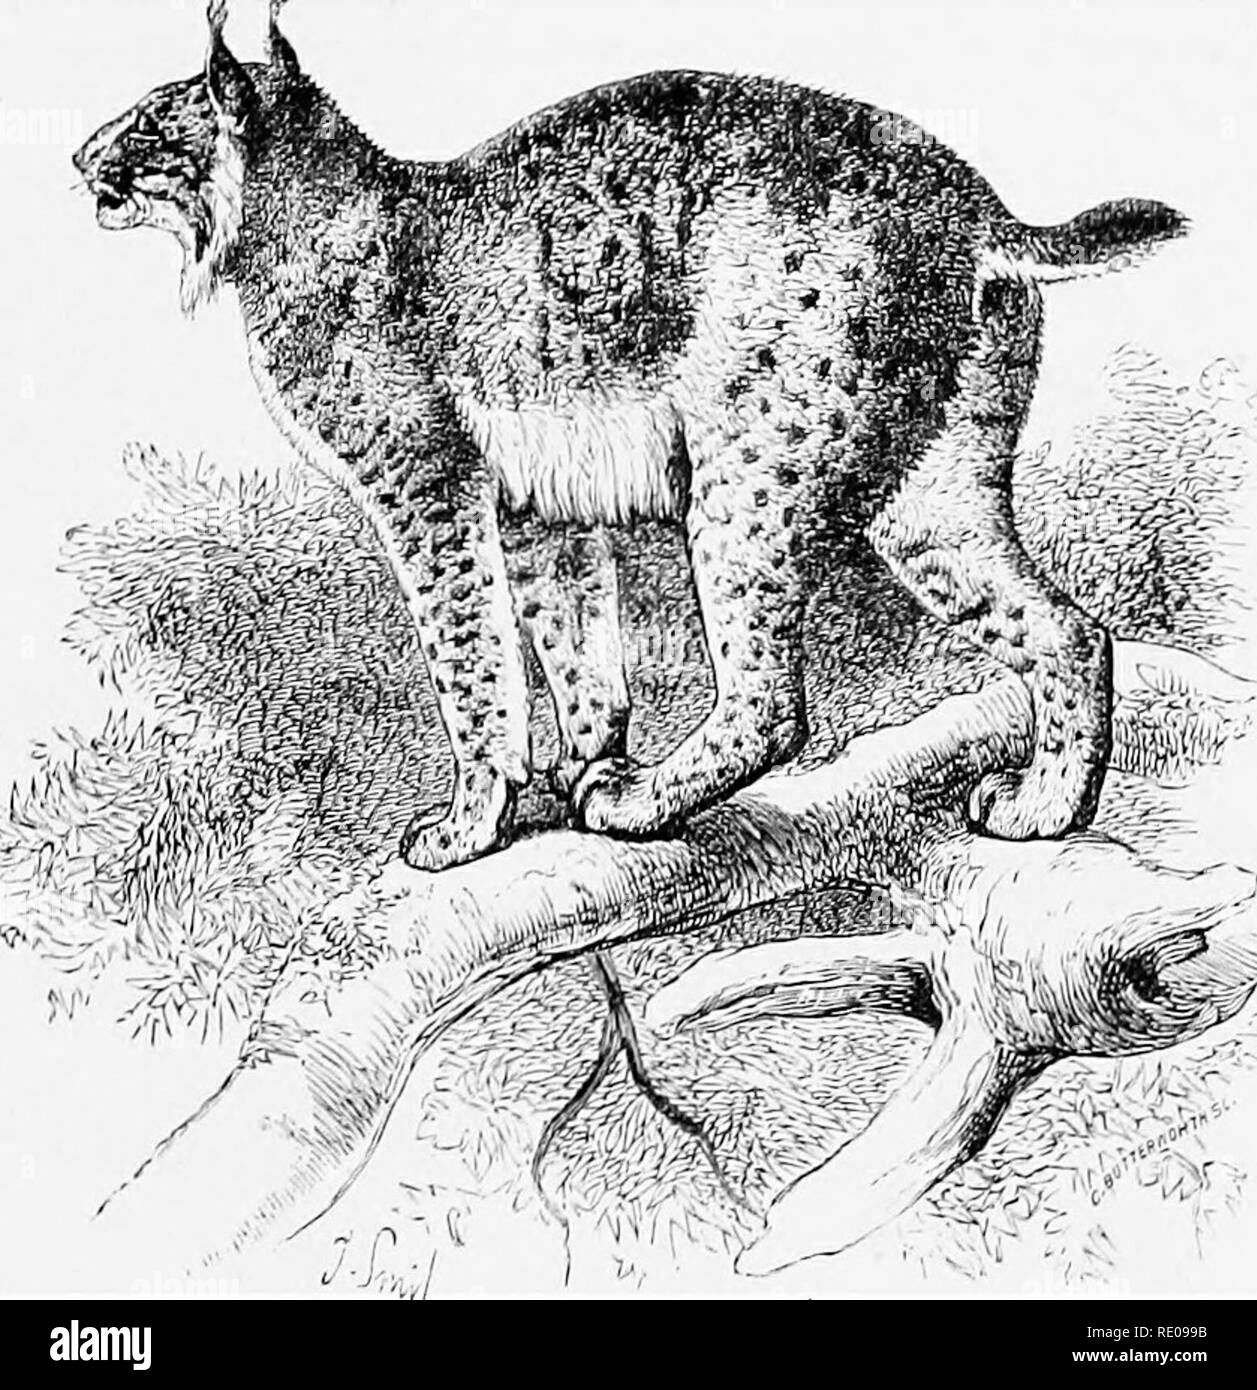 . An introduction to the study of mammals living and extinct. Mammals. FELID^ 519 are F. lynx, of Scandinavia, Russia, Northern Asia, and till lately the forest regions of Central Europe; though not an inhabitant of Britain during the historic period, its remains have been found in cave-deposits of Pleistocene age; F. cervaria, Siberia; F. pardina, Turkey, Greece, Sicily, Sardinia, and Spain; and F. isahellina, Tibet. The American varieties are F. canadensis, the most northern species, and F. rufa, the American Wild Cat or Bay Lynx, extensively dis- tributed from the Atlantic to the Pacific th Stock Photo